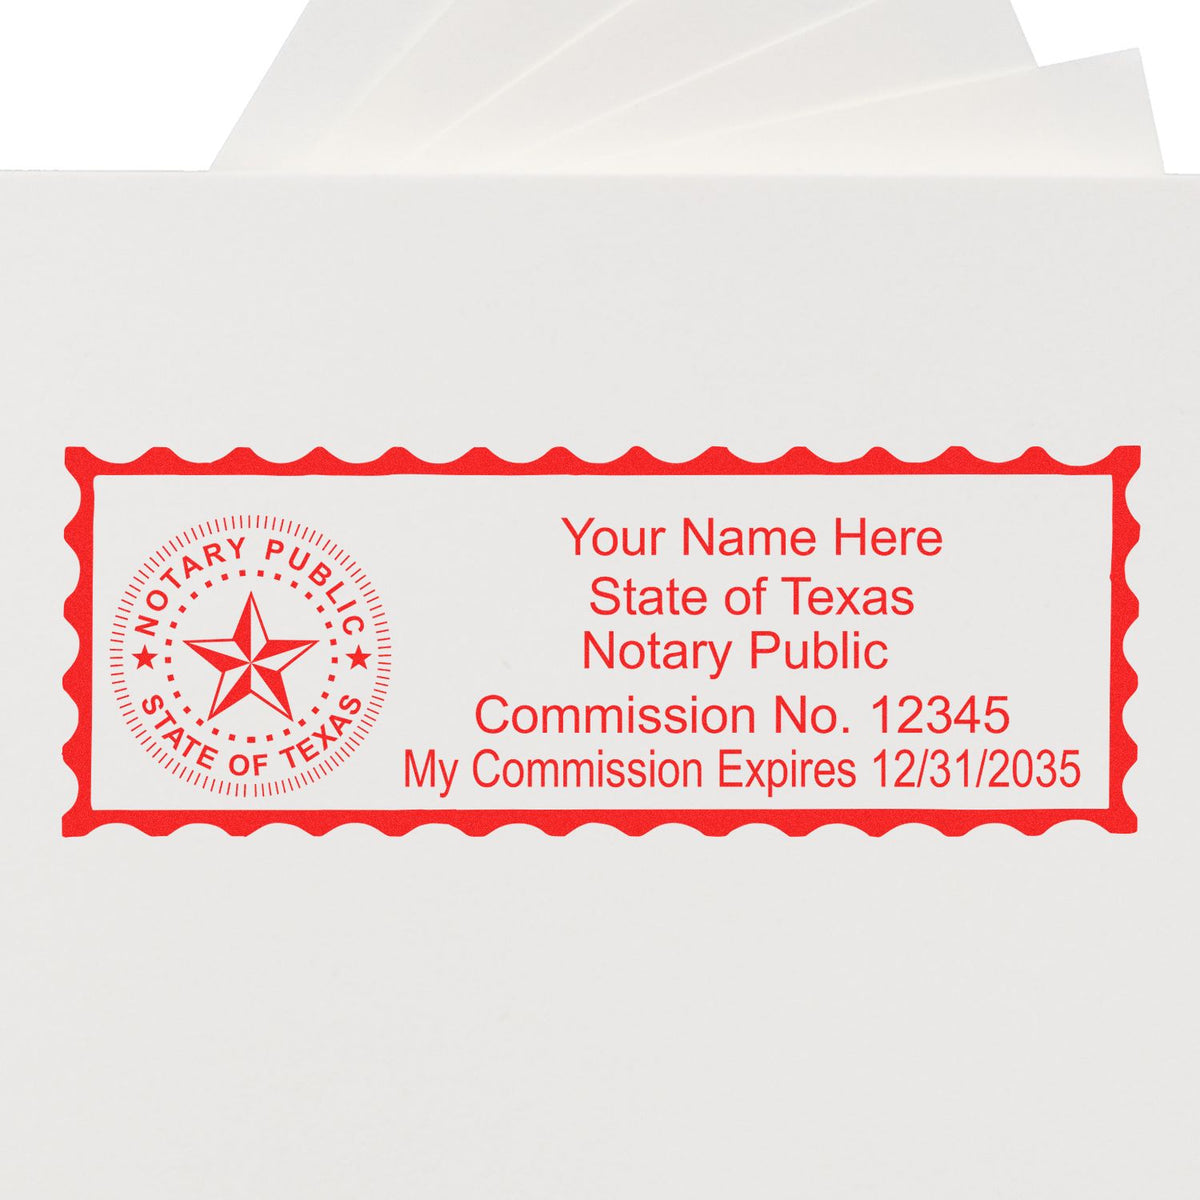 An alternative view of the MaxLight Premium Pre-Inked Texas State Seal Notarial Stamp stamped on a sheet of paper showing the image in use